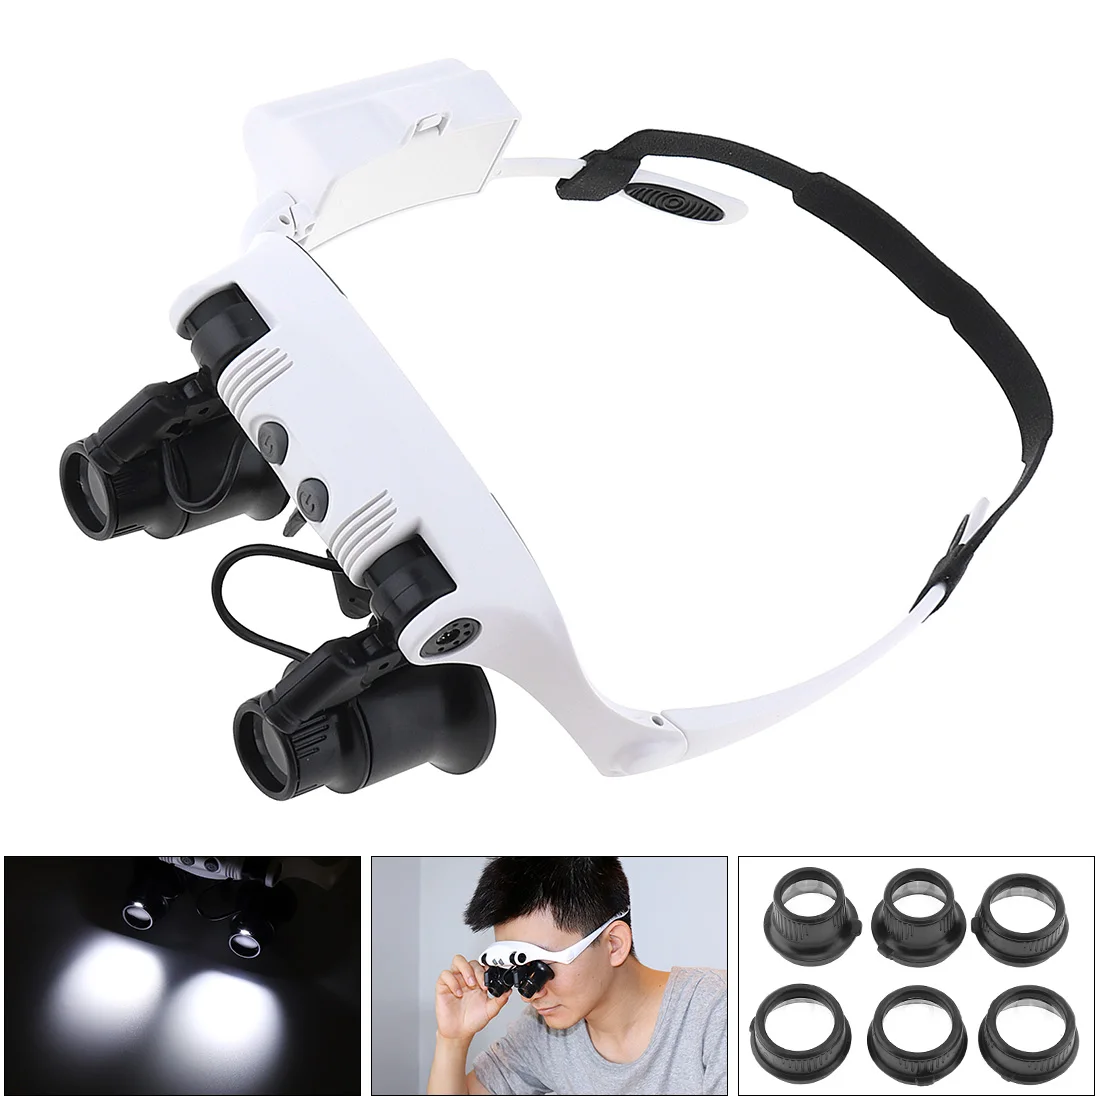 10X 15X 20X 25X Adjustable Headband Magnifier Eyeglass Magnifying Glass Tool with LED Light and 8 Lens for Jewel Repair